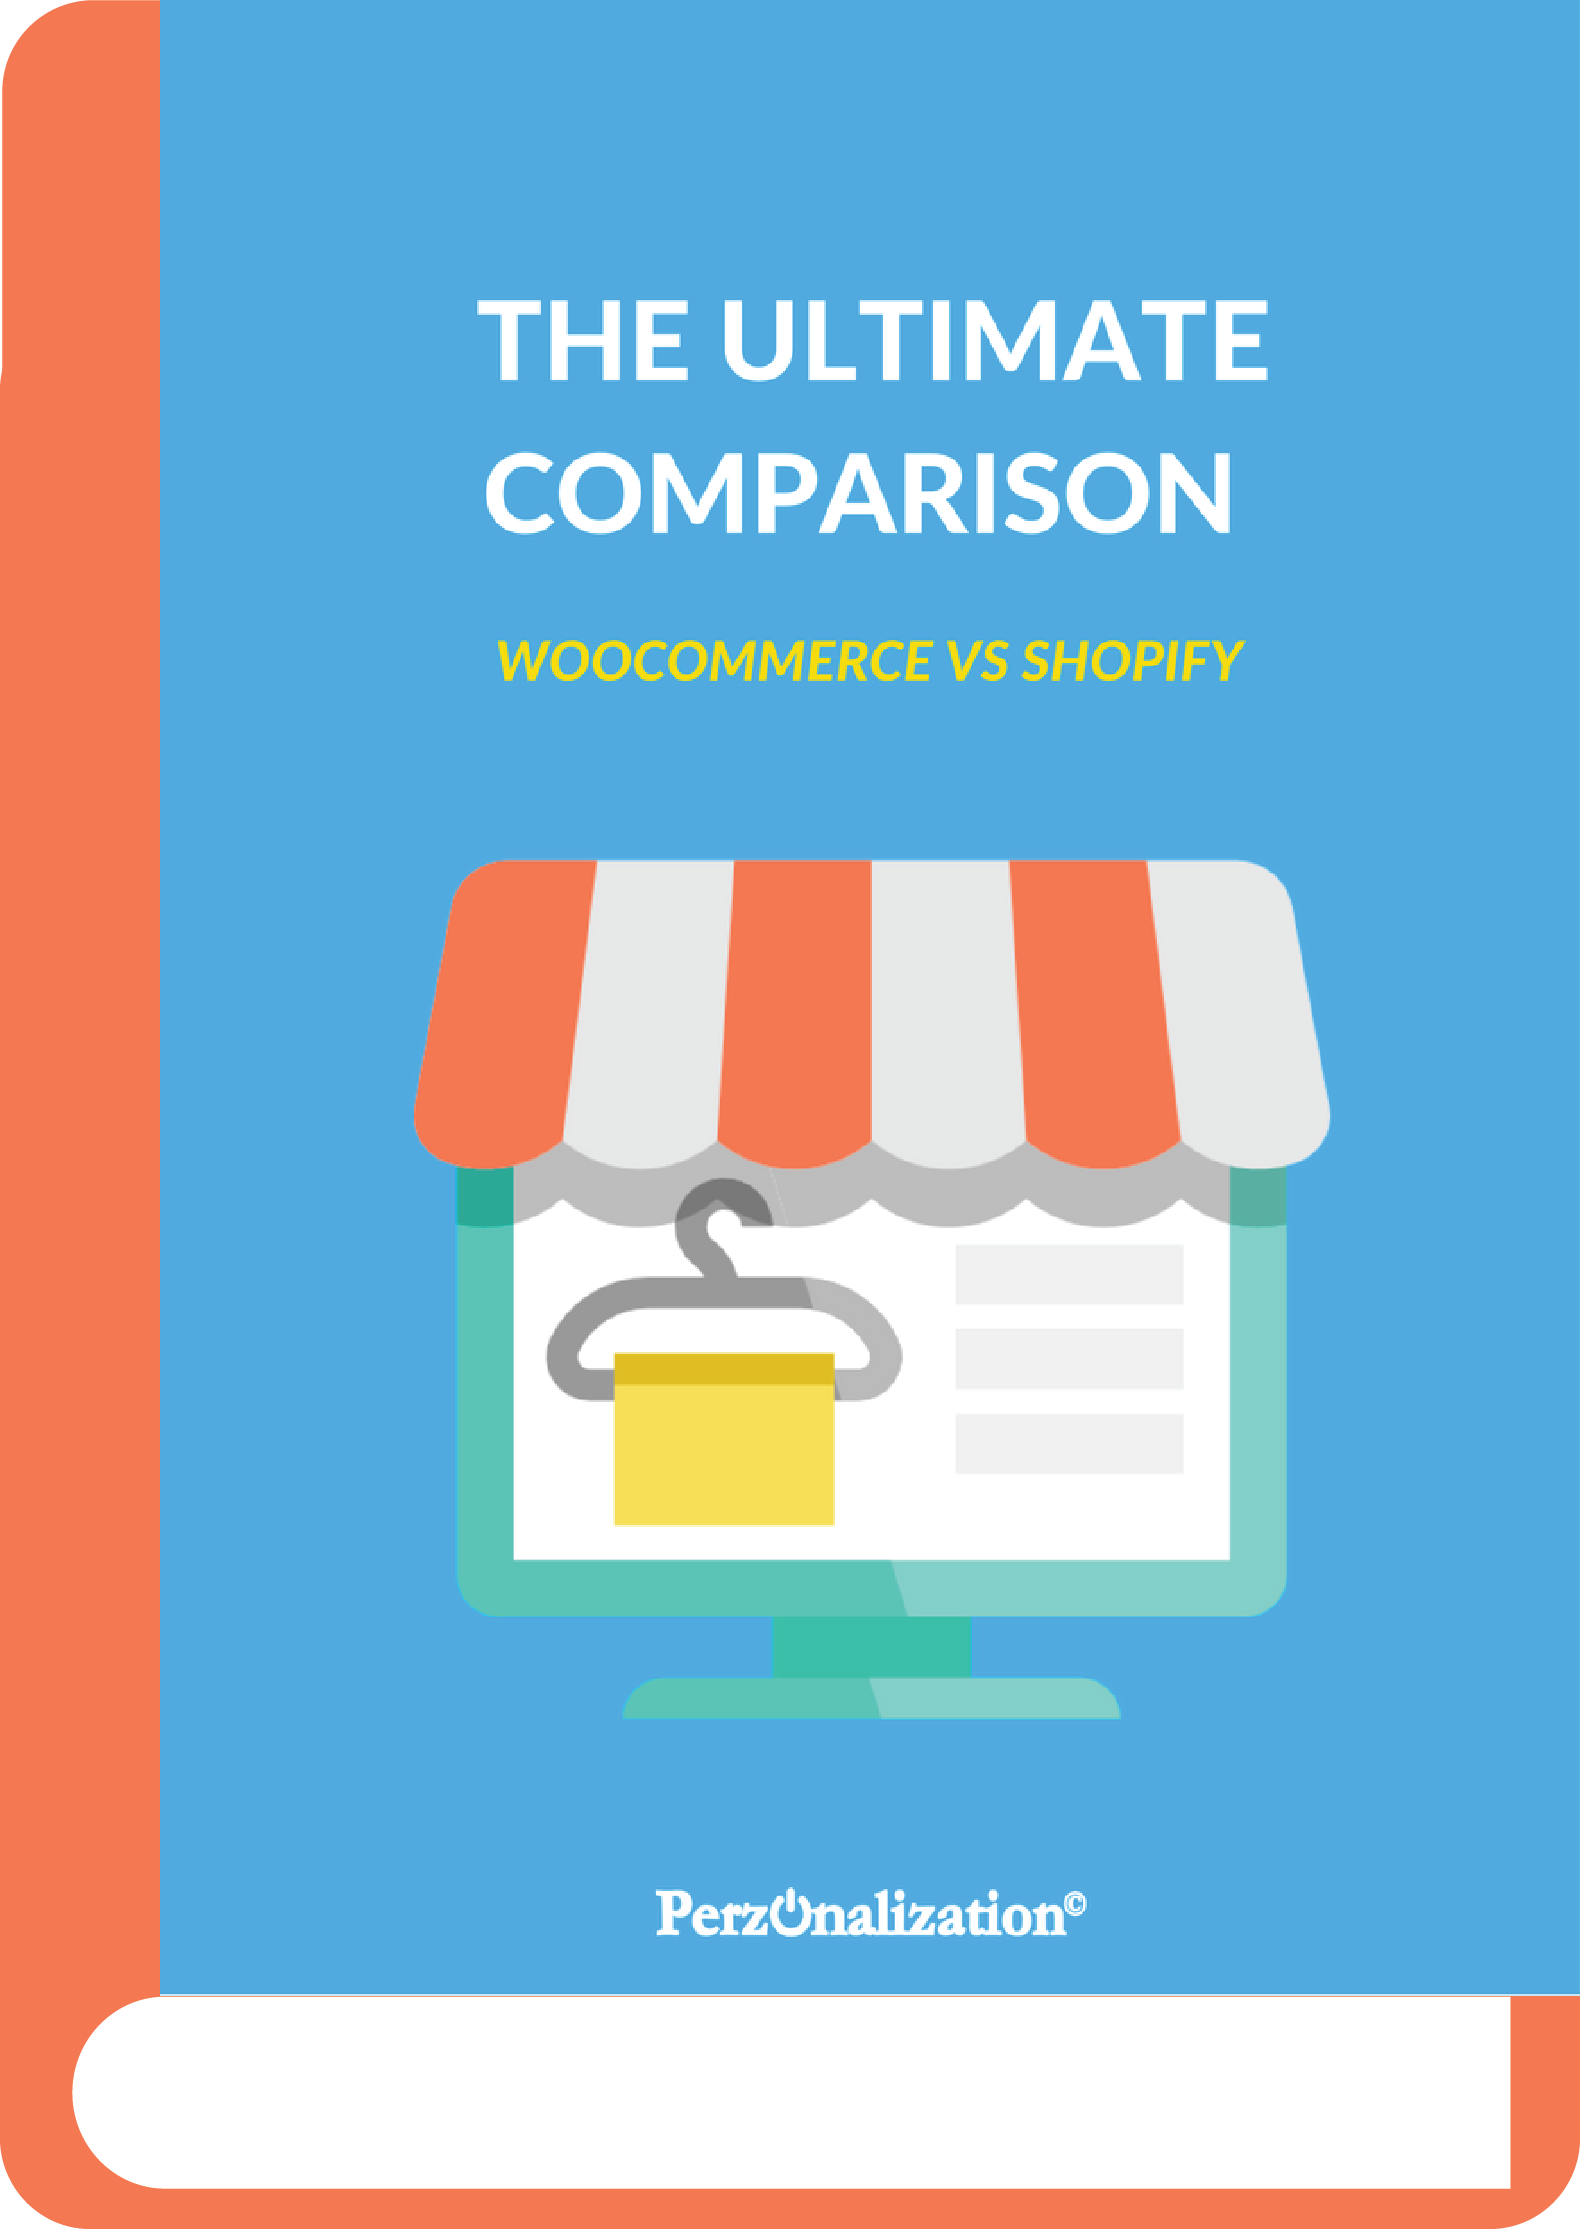 If you’re just building your eCommerce business, it may be hard to decide on an eCommerce platform. In this free eBook, find out about different aspects of the famous eCommerce platforms WooCommerce and Shopify. Learn about their capabilities on customer support, design, hosting. Don’t make your decision before checking this guide!